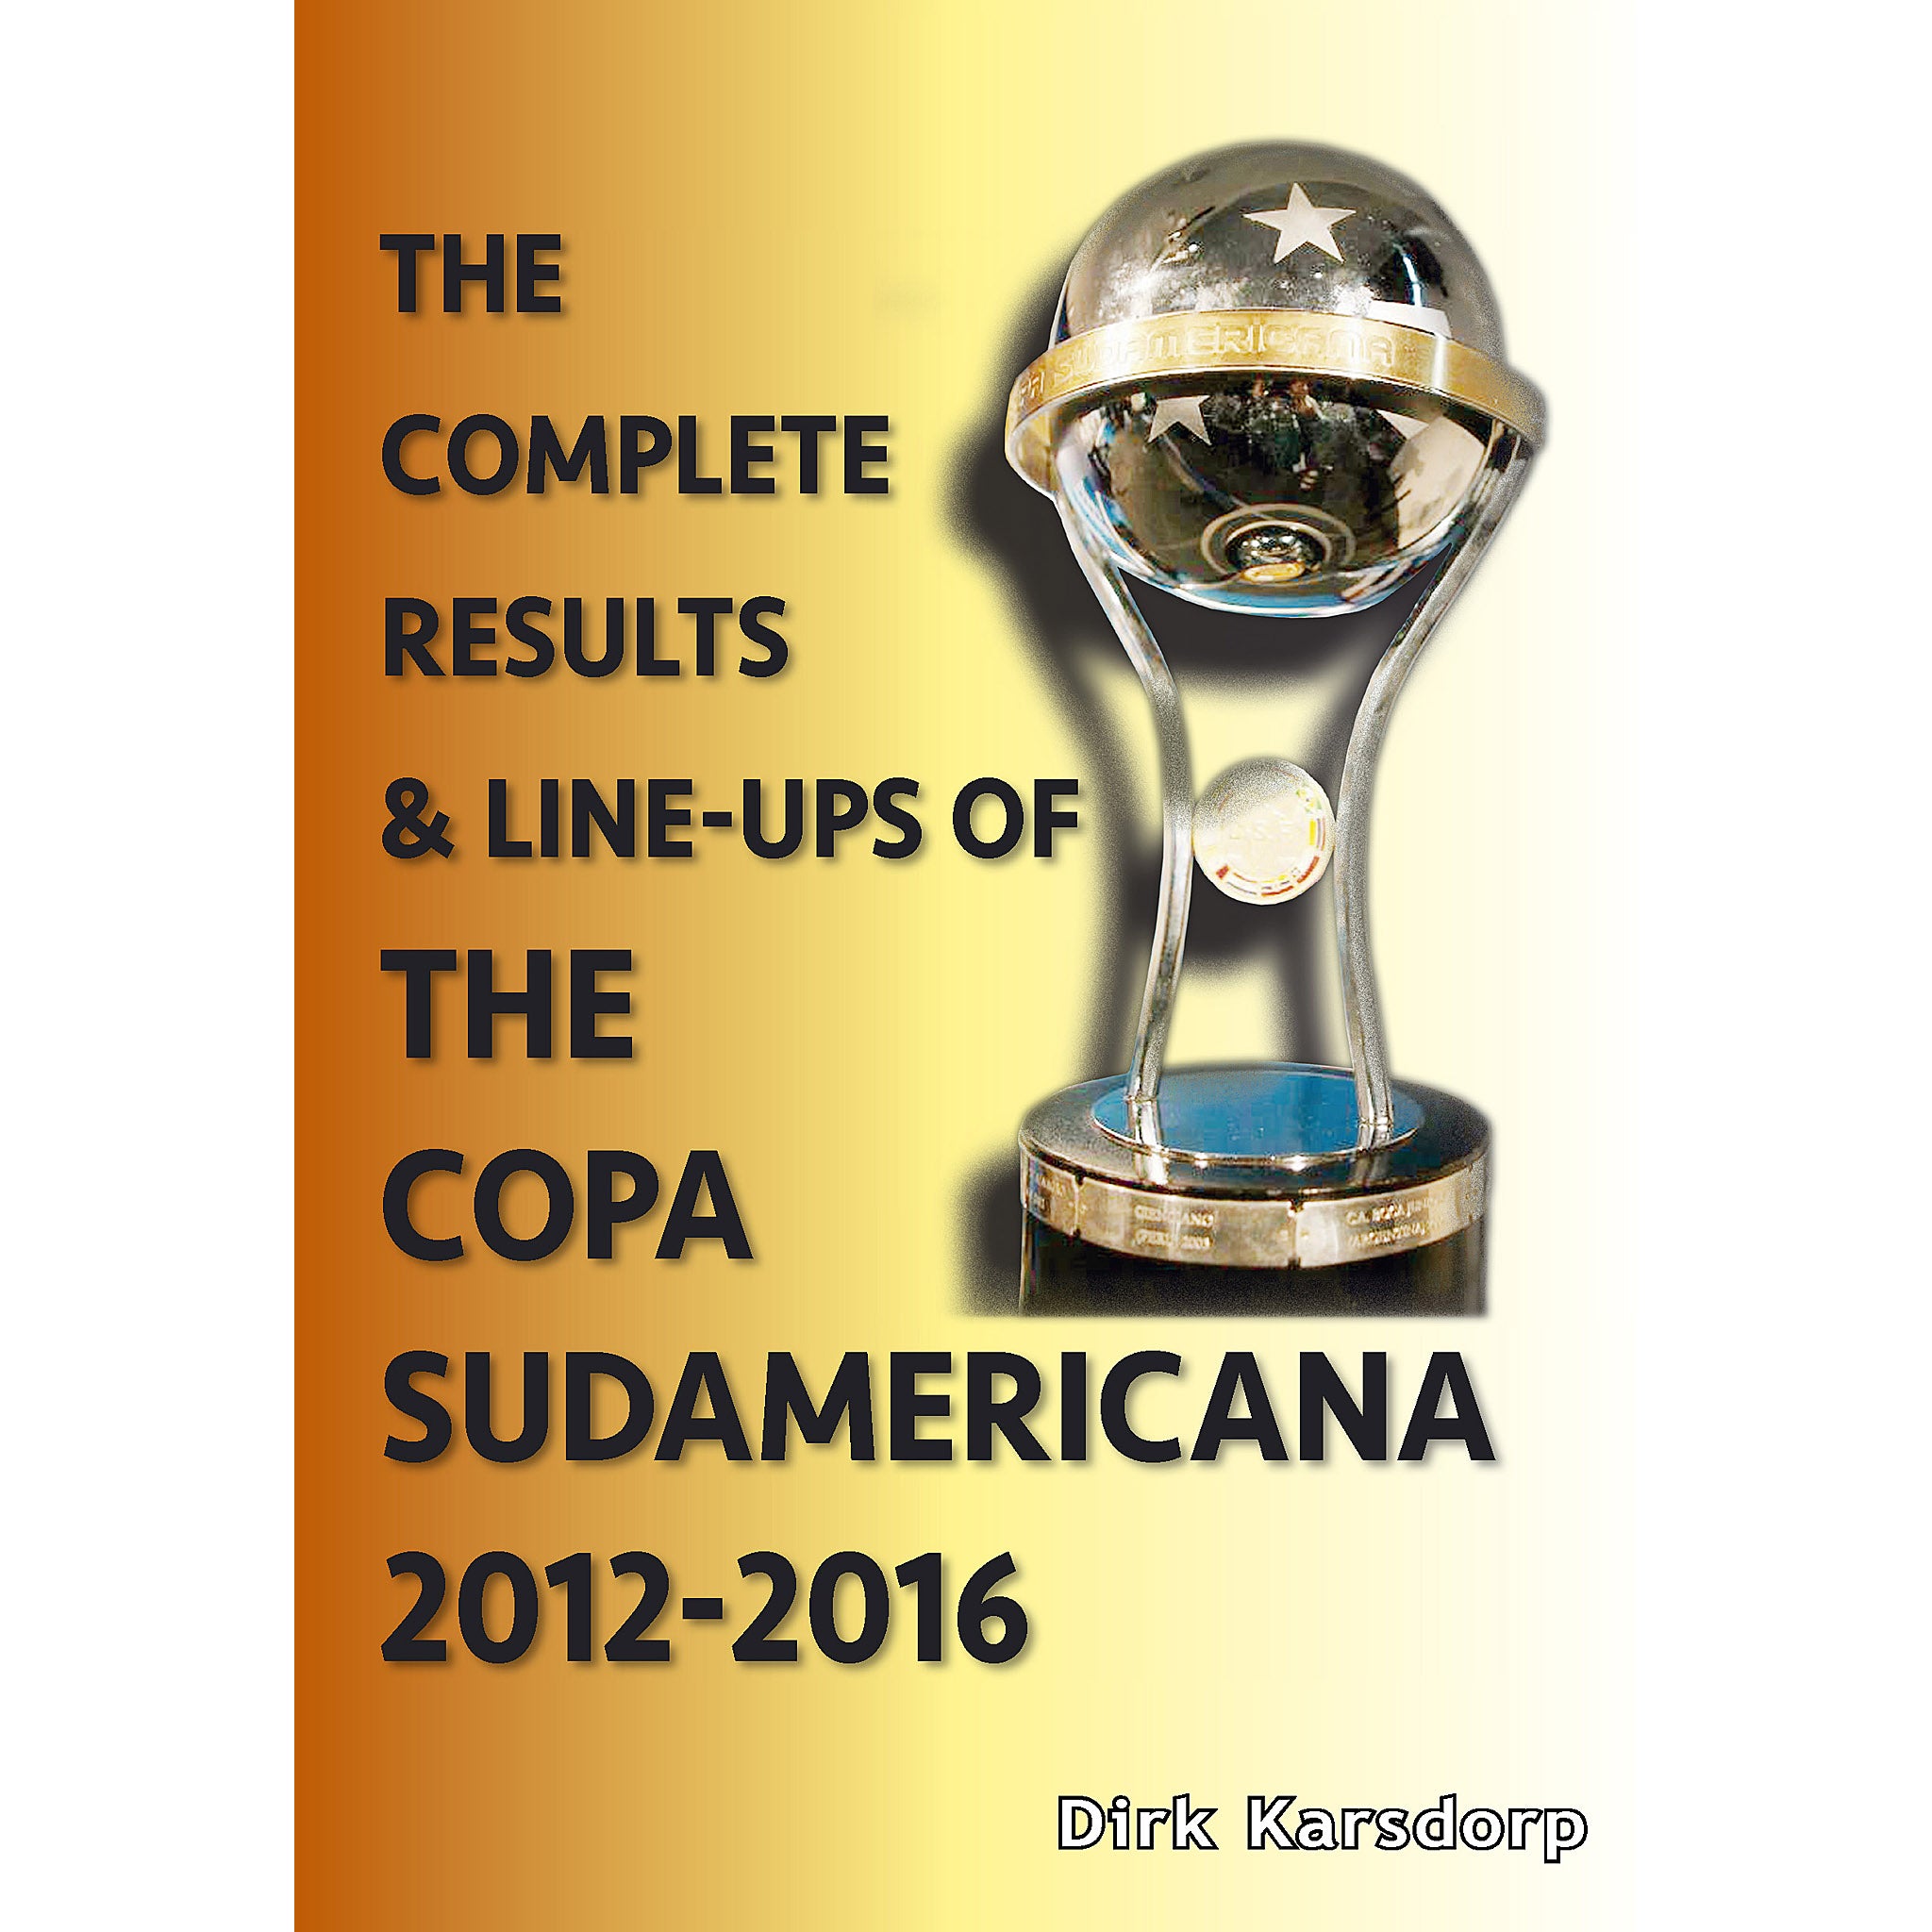 The Complete Results & Line-ups of the Copa Sudamericana 2012-2016